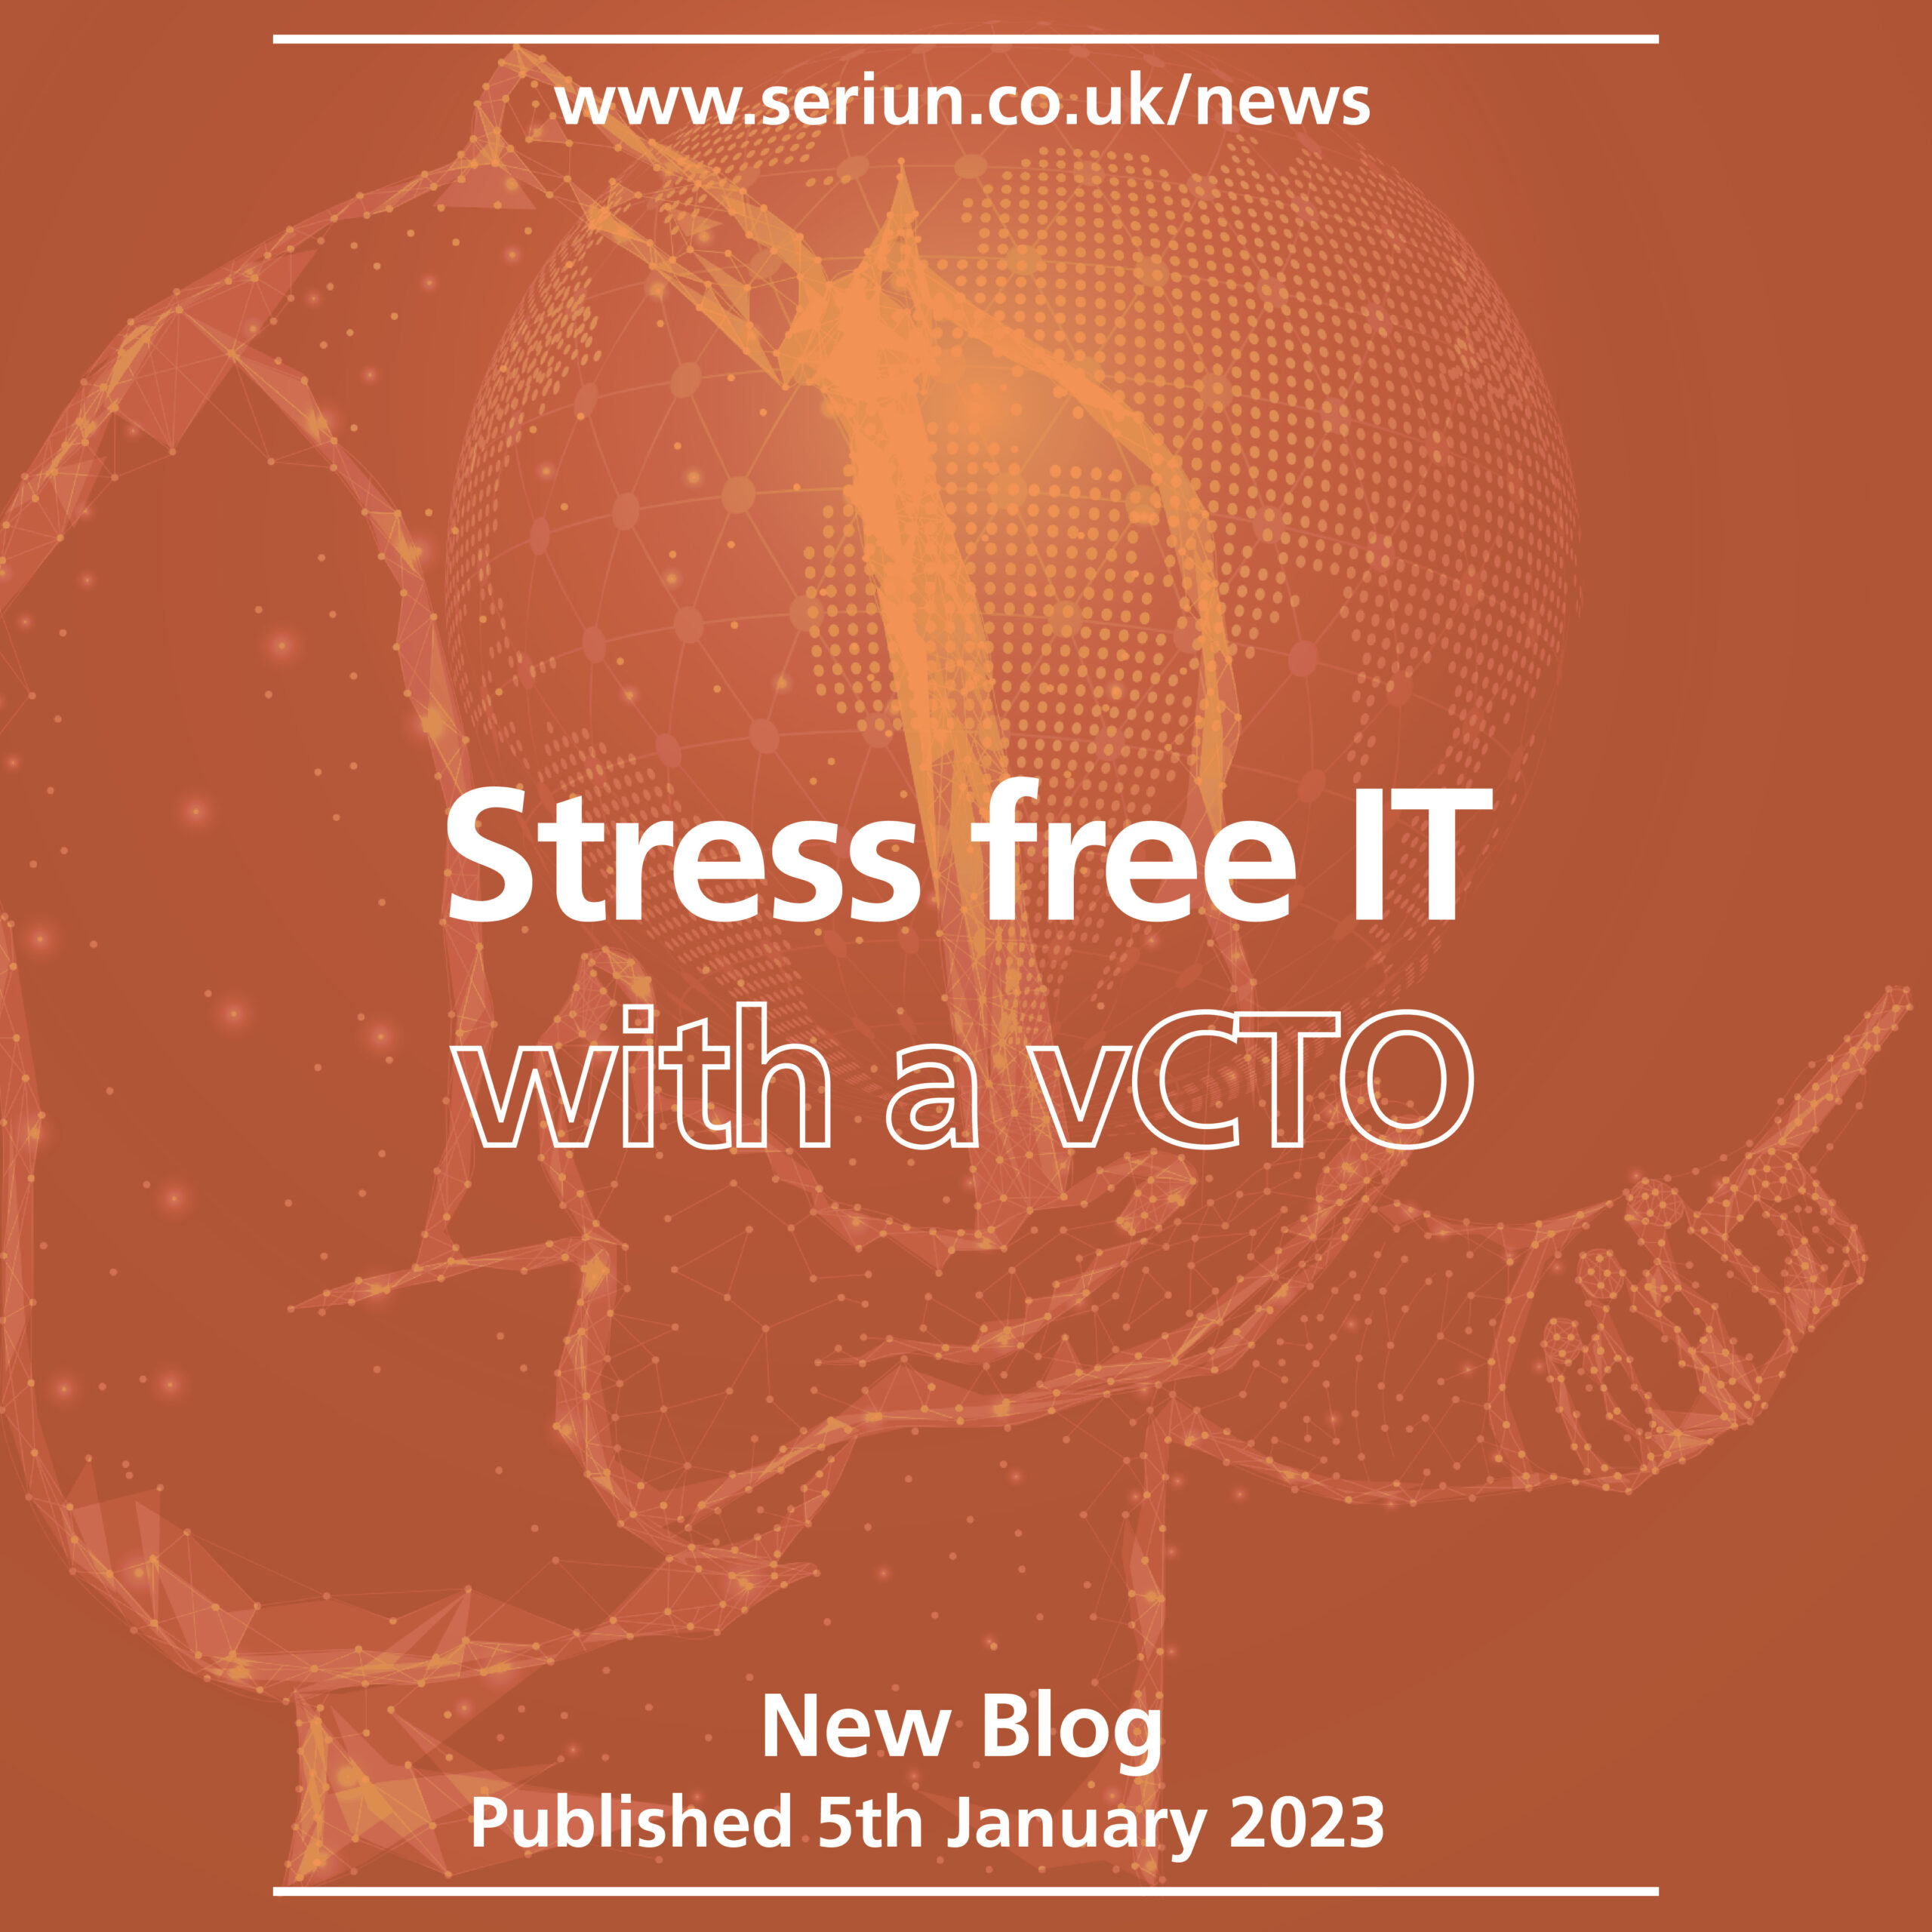 Stress free IT with a vCTO